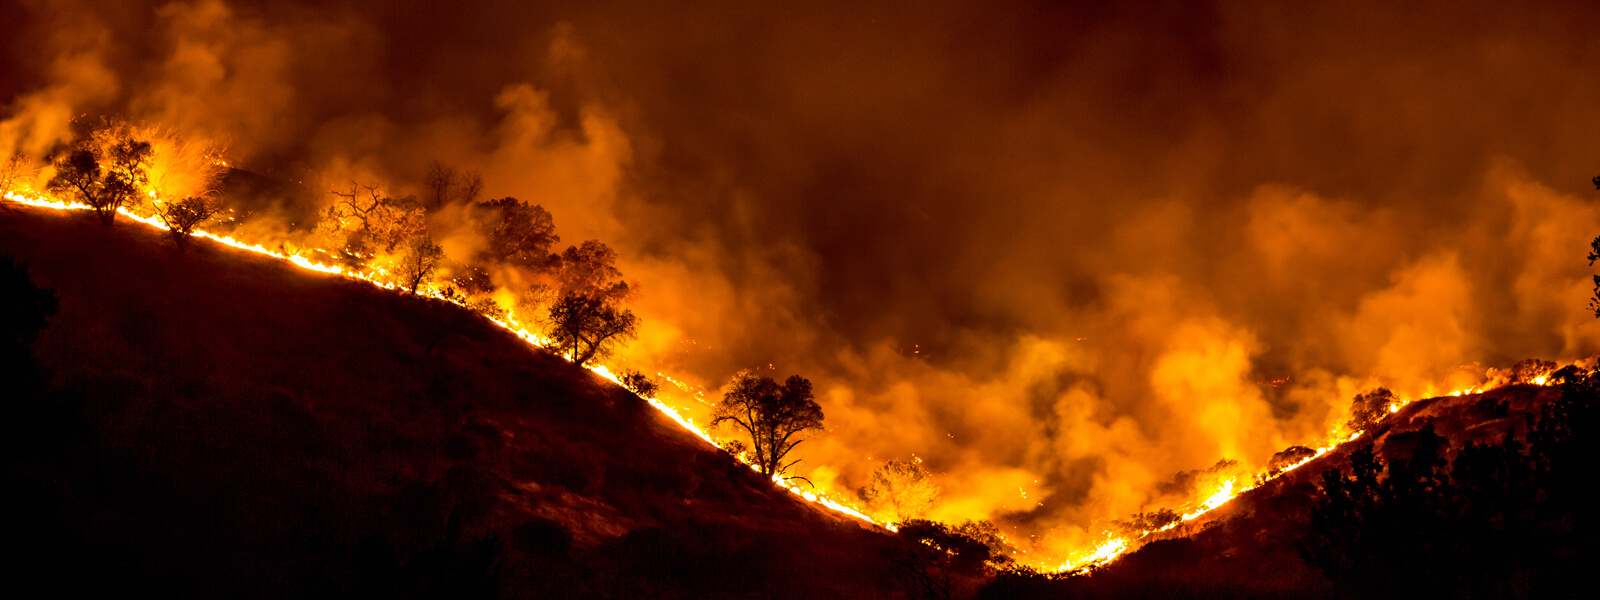 Massive fire burning in California and Nevada is spawning